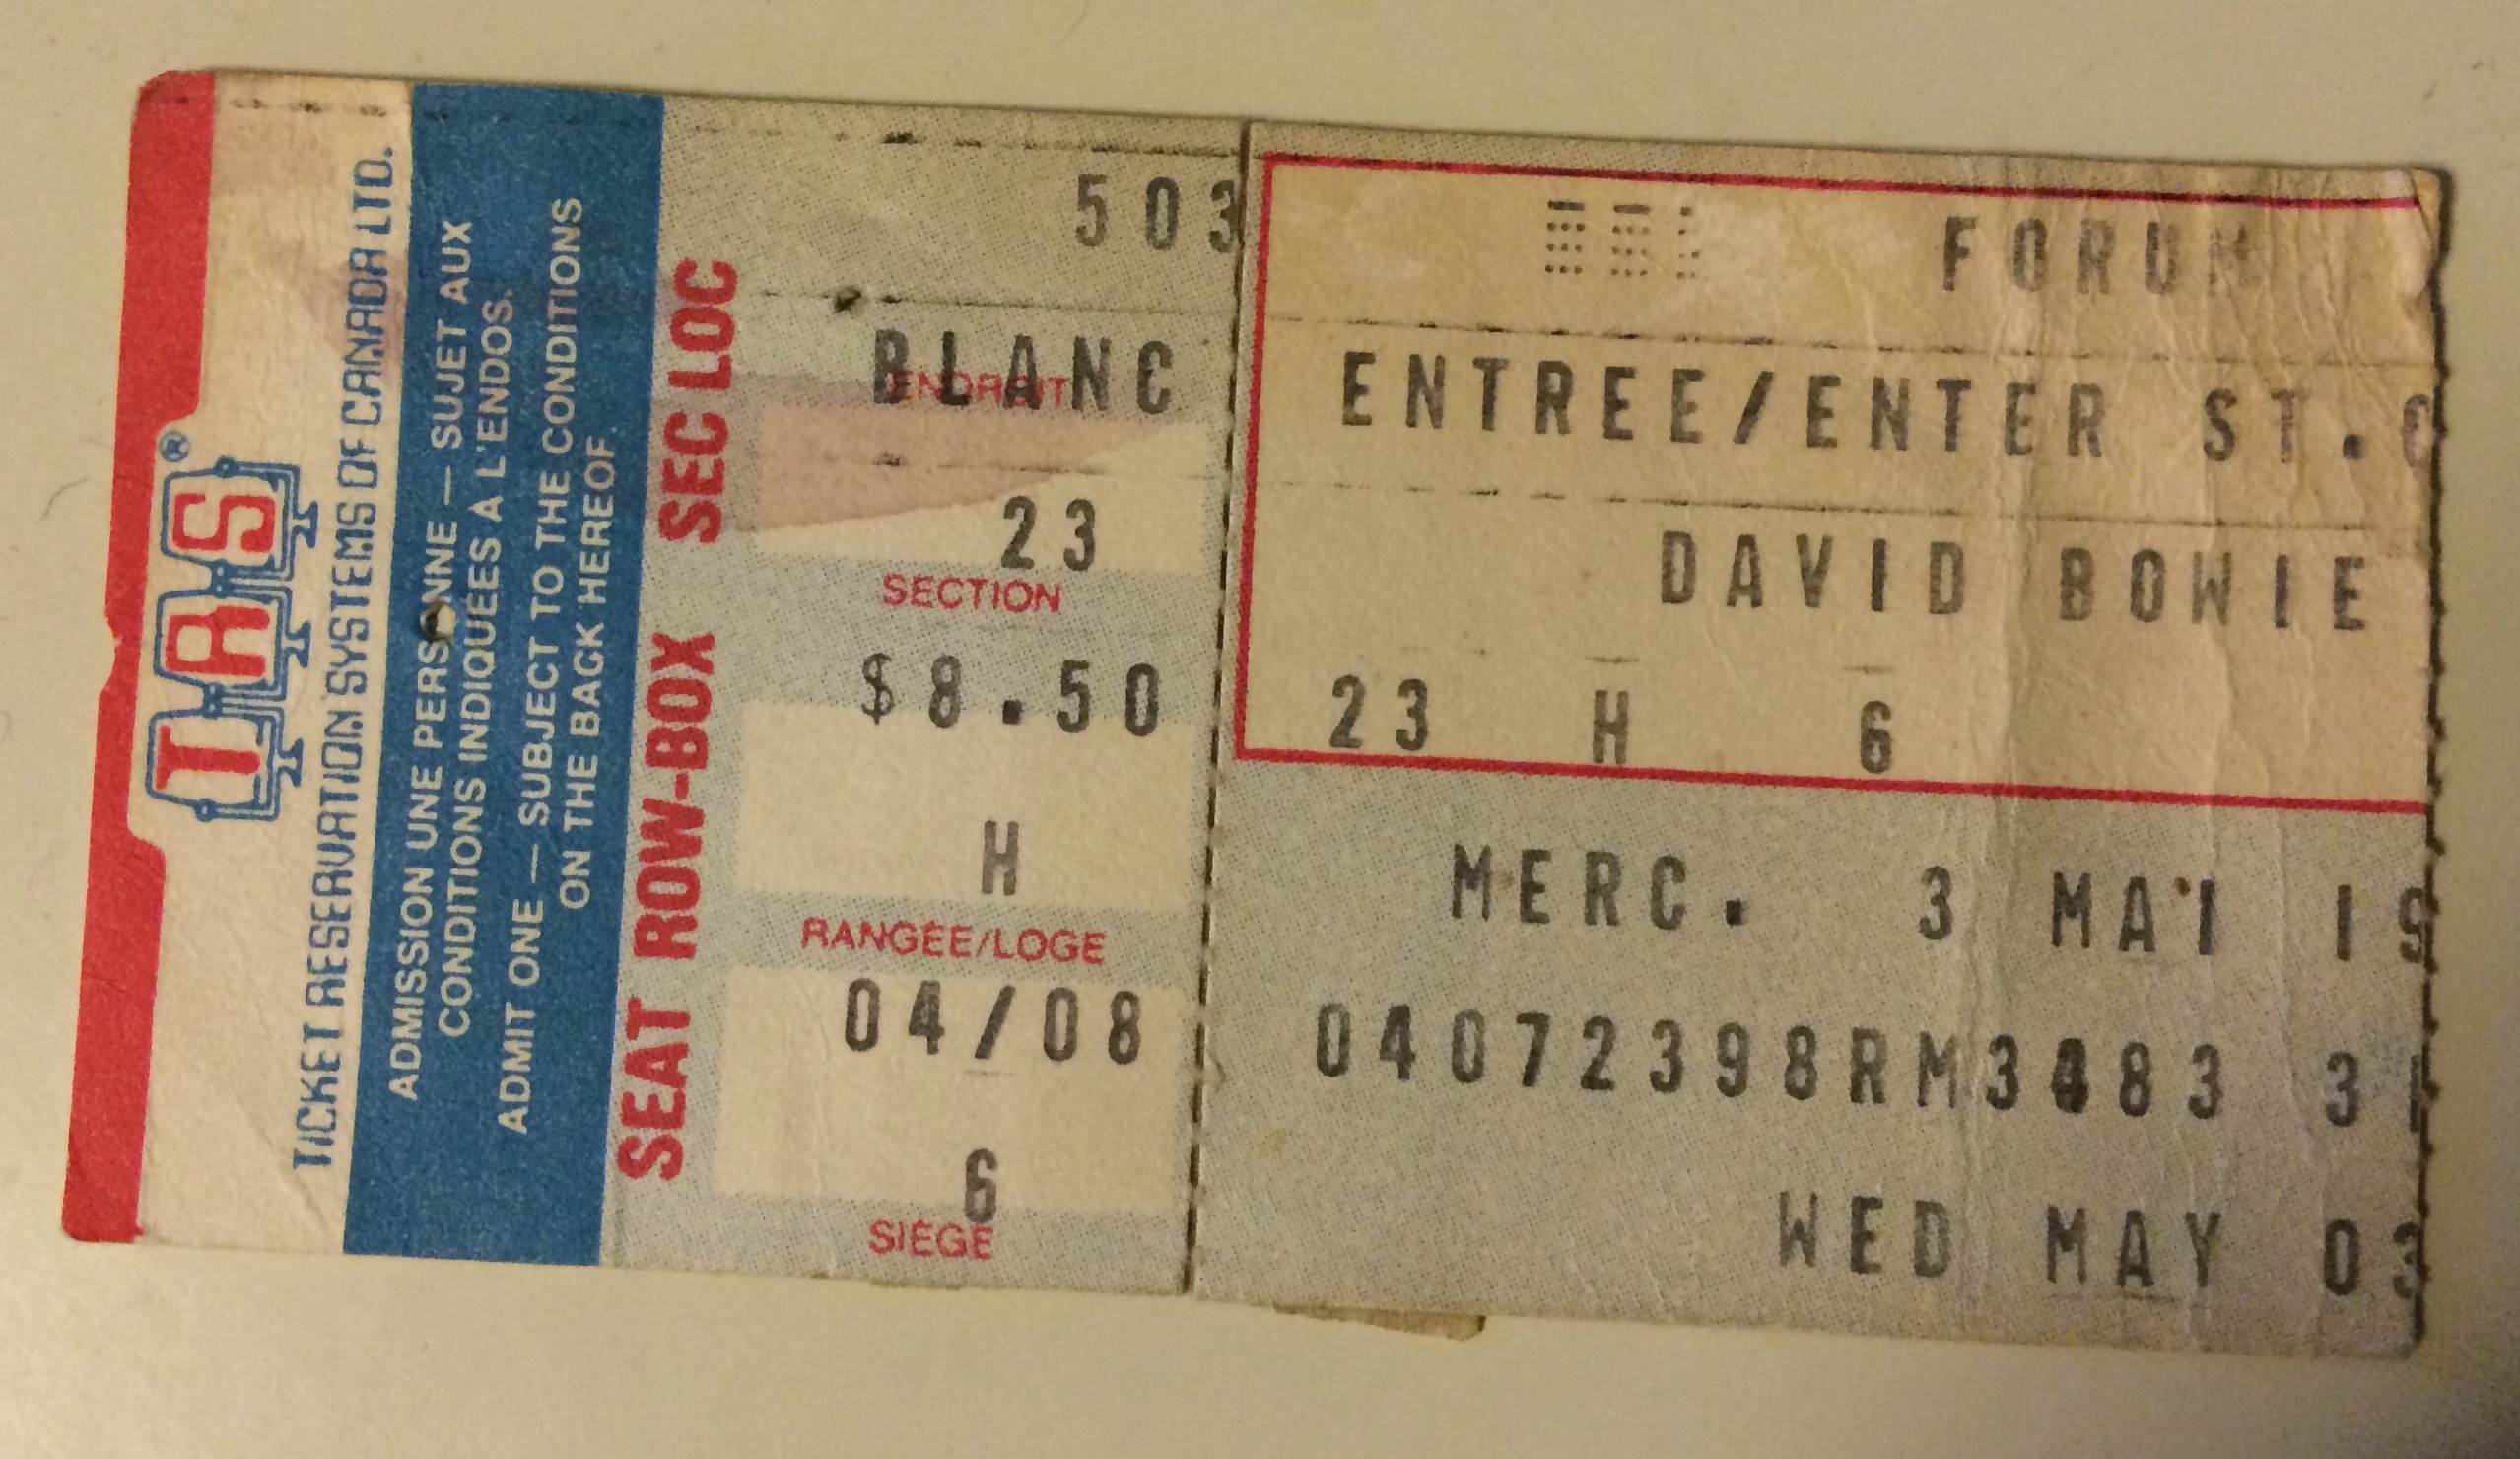 My ticket stub from the Heroes tour